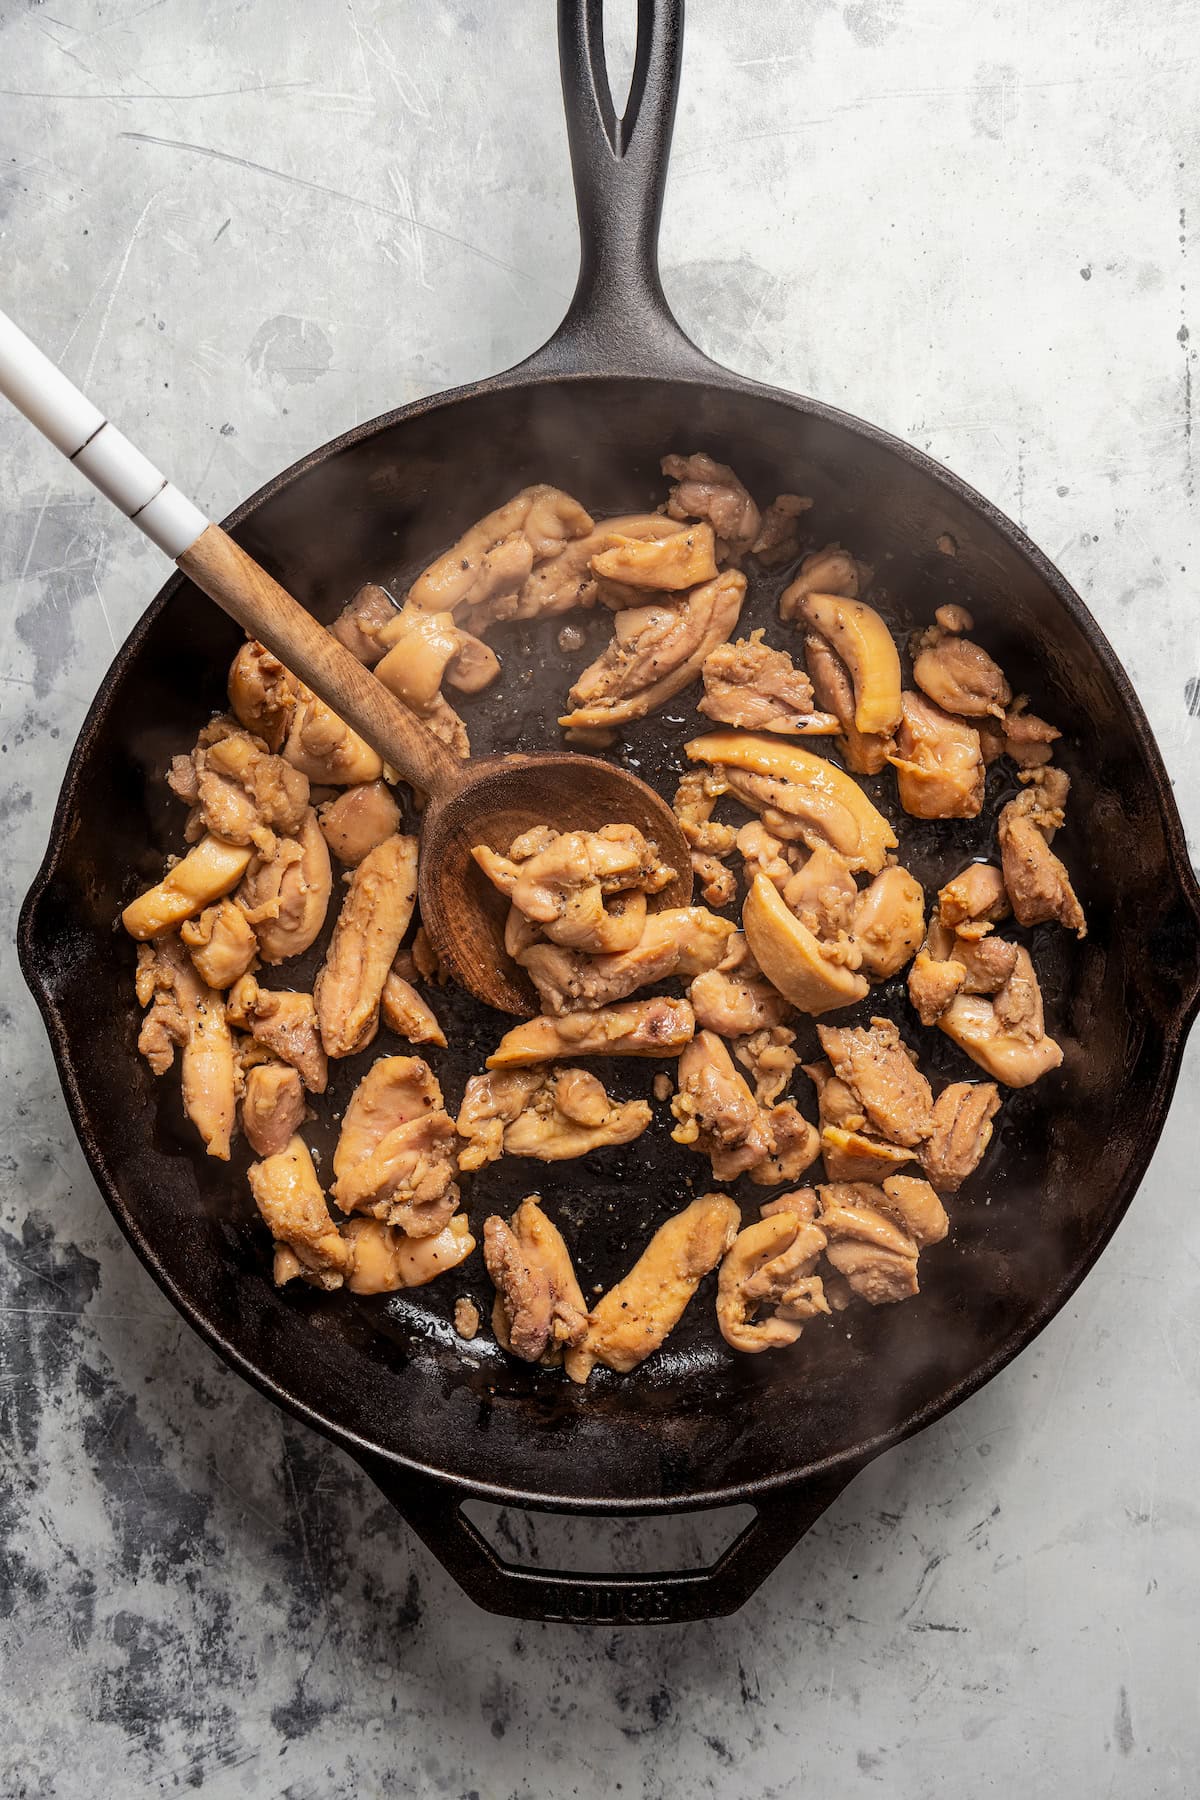 Sauteed chicken pieces in a skillet with a wooden spoon.